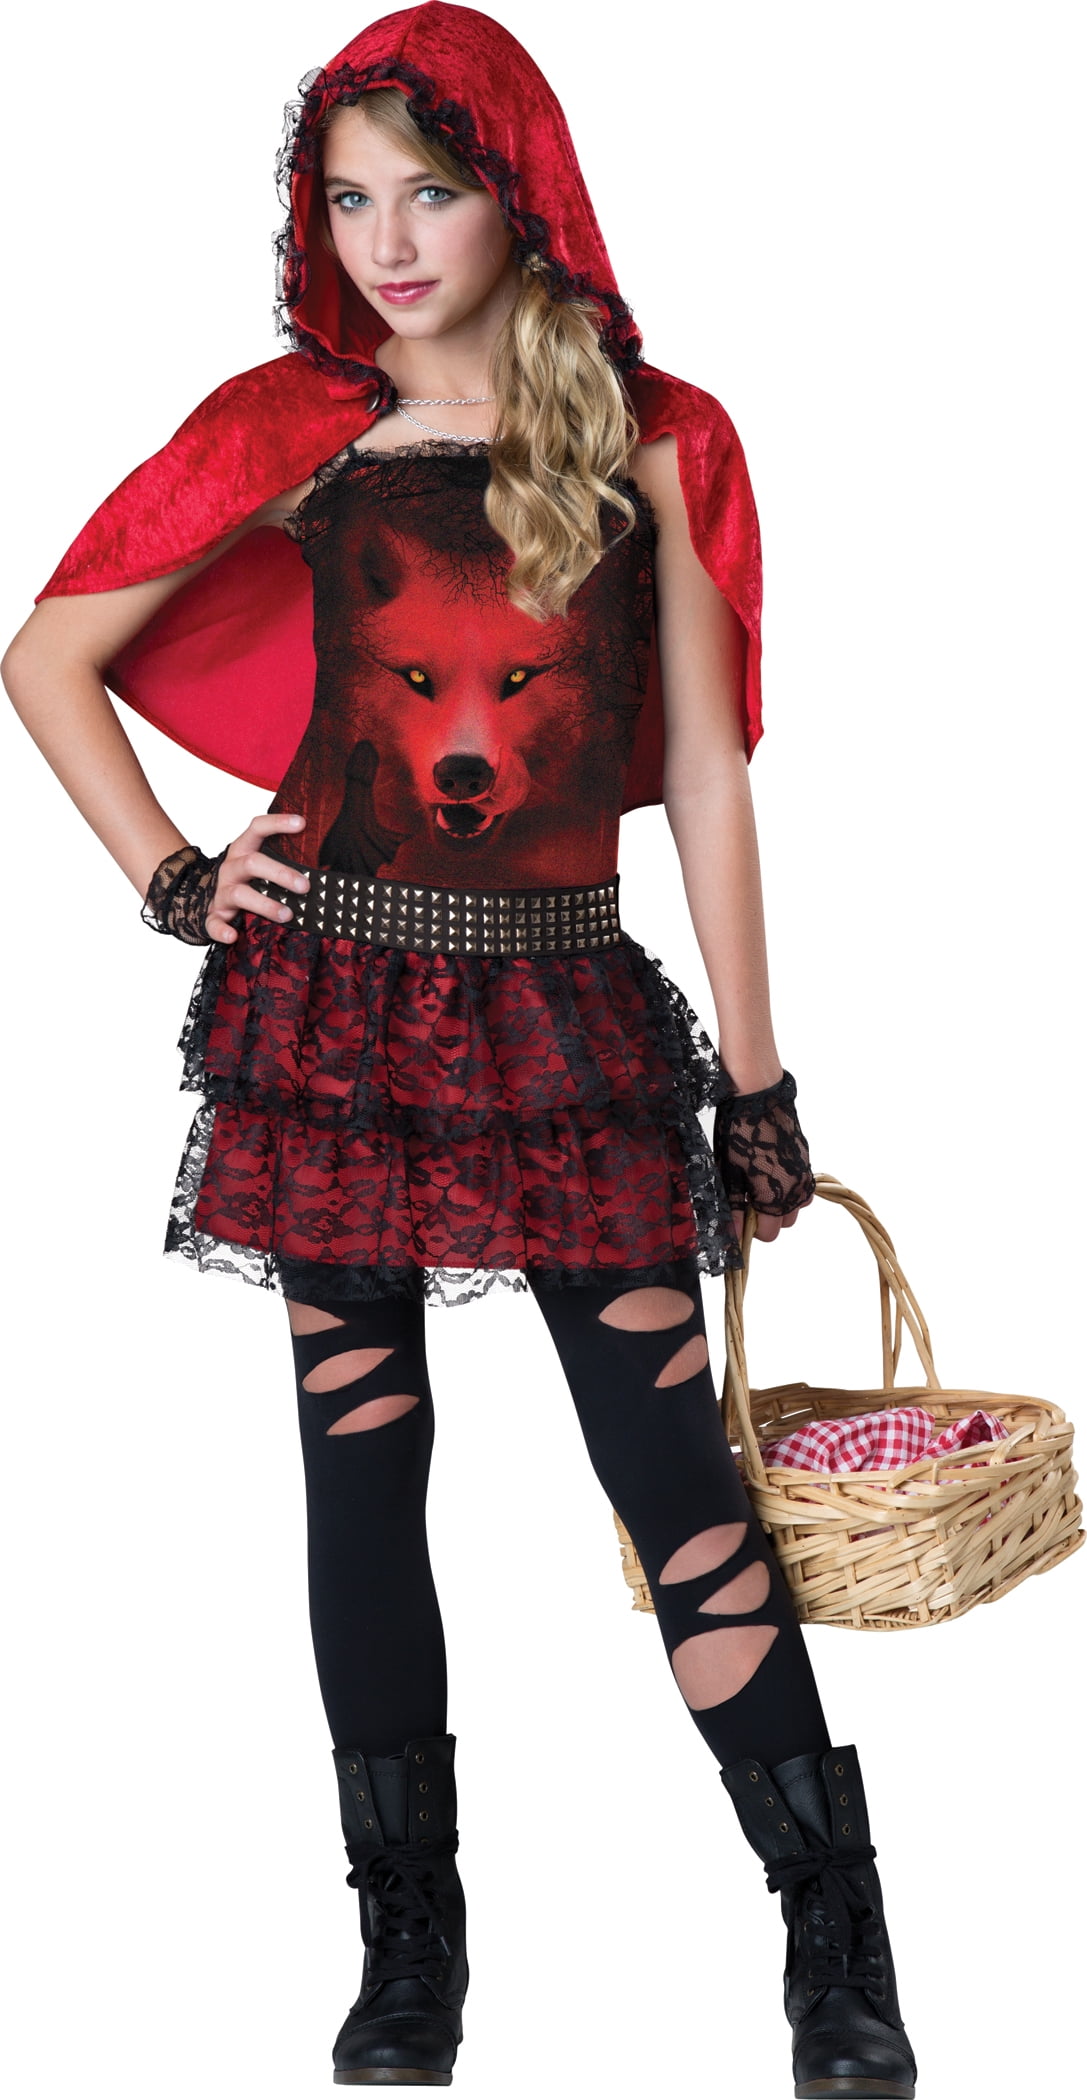 Teen Red Riding Hood Costume by Incharacter Costumes LLC 18073, 8 to 10 ...